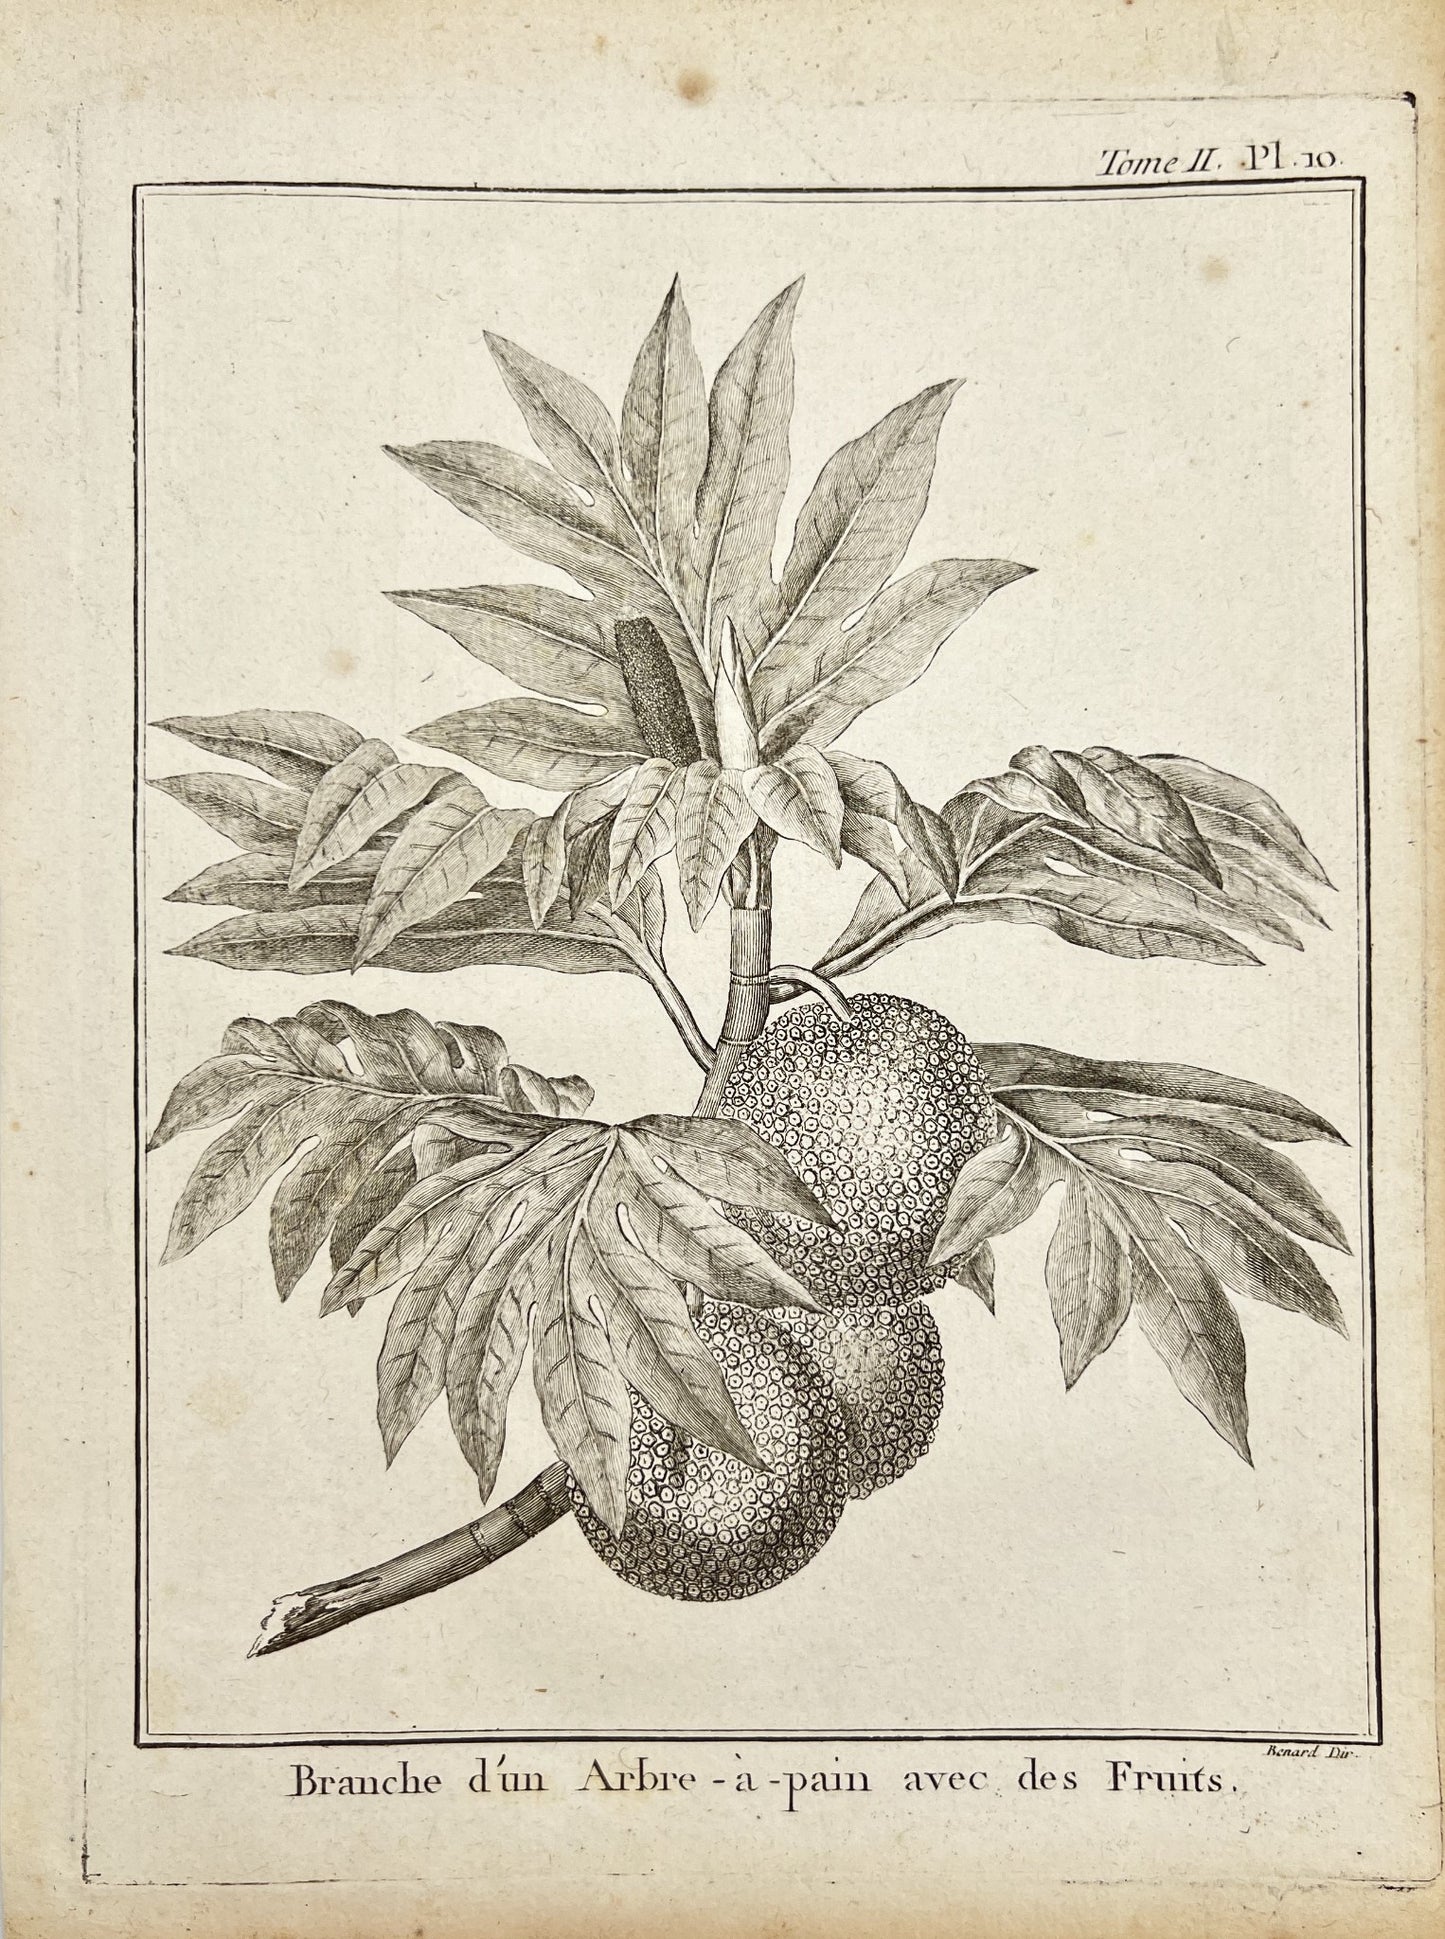 Antique Engraving - Voyage of James Cook - Breadfruit Tree - Pacific Cultures